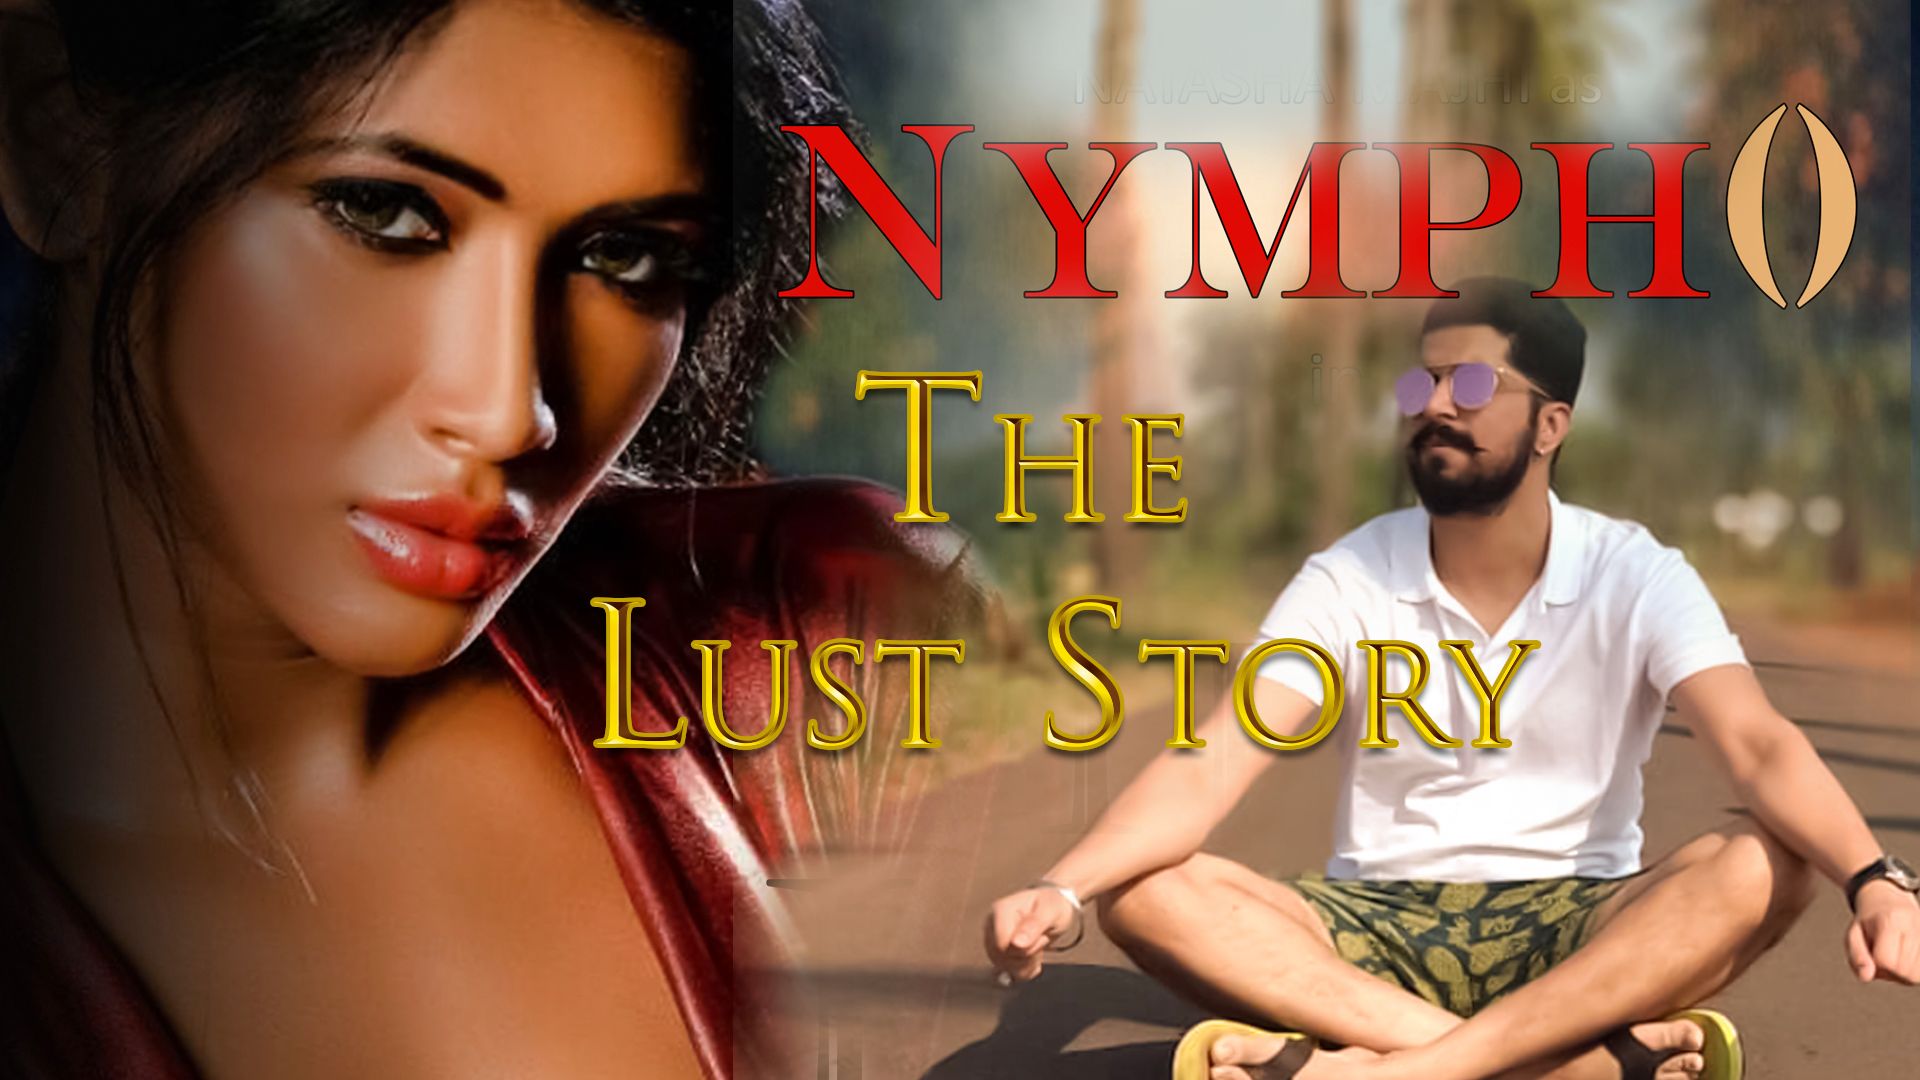 Nympho The Lust Story pic